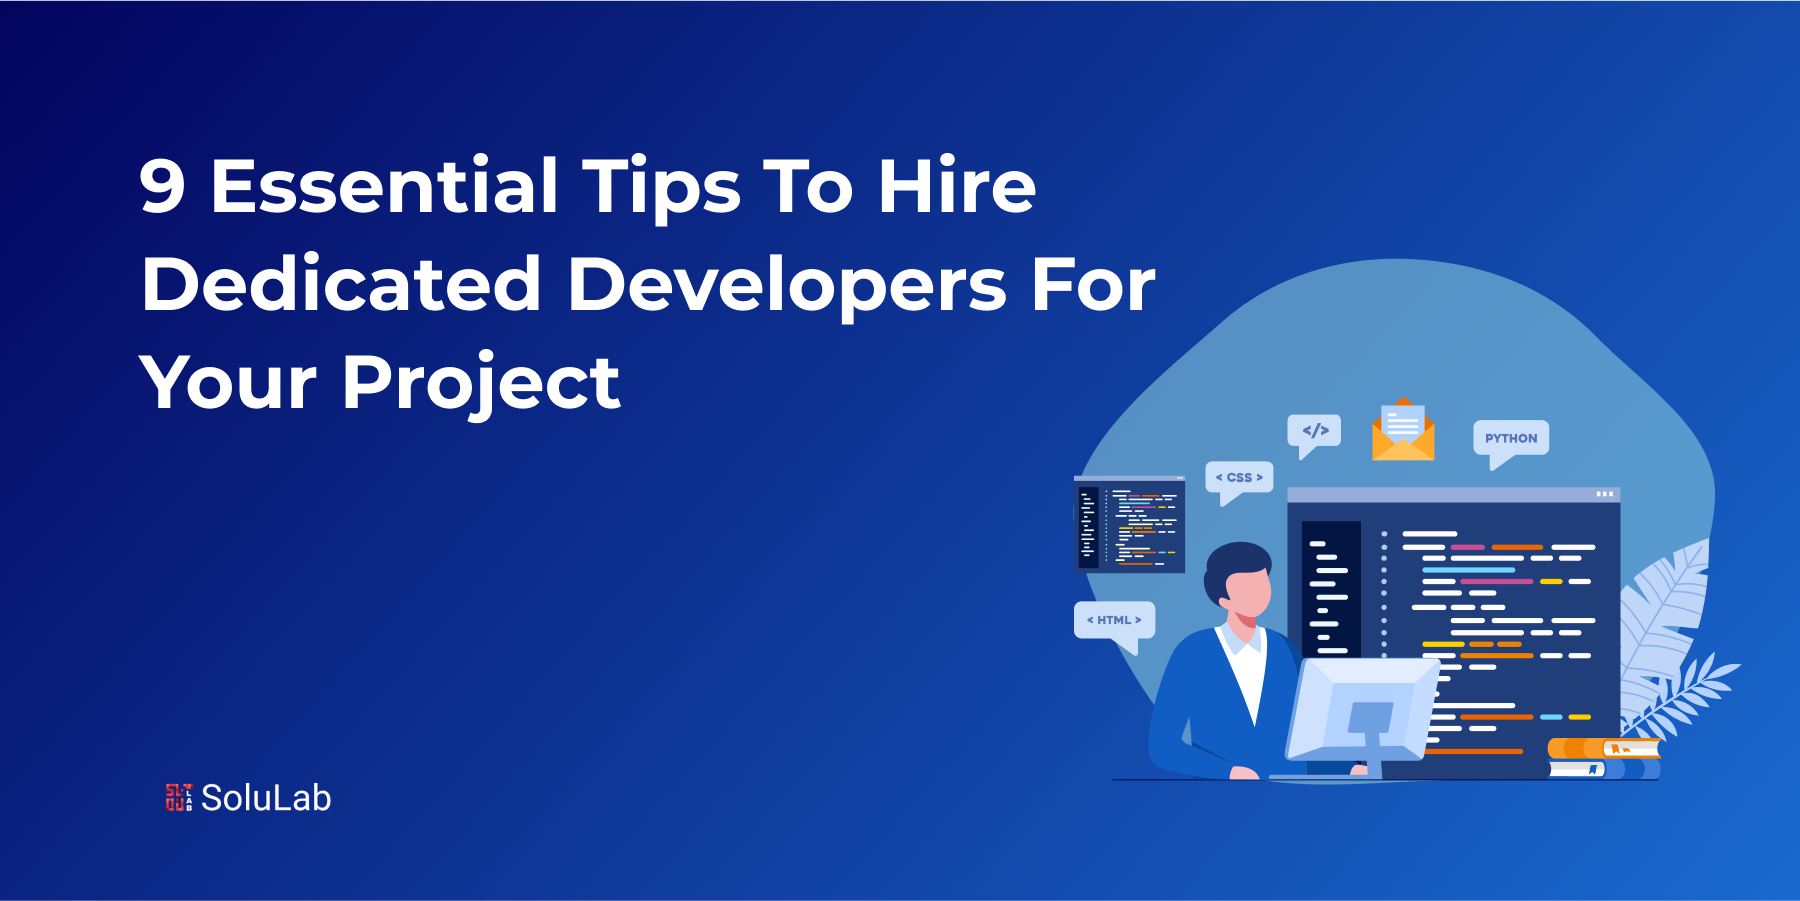 9 Essential Tips to Hire Dedicated Developers for Your Project